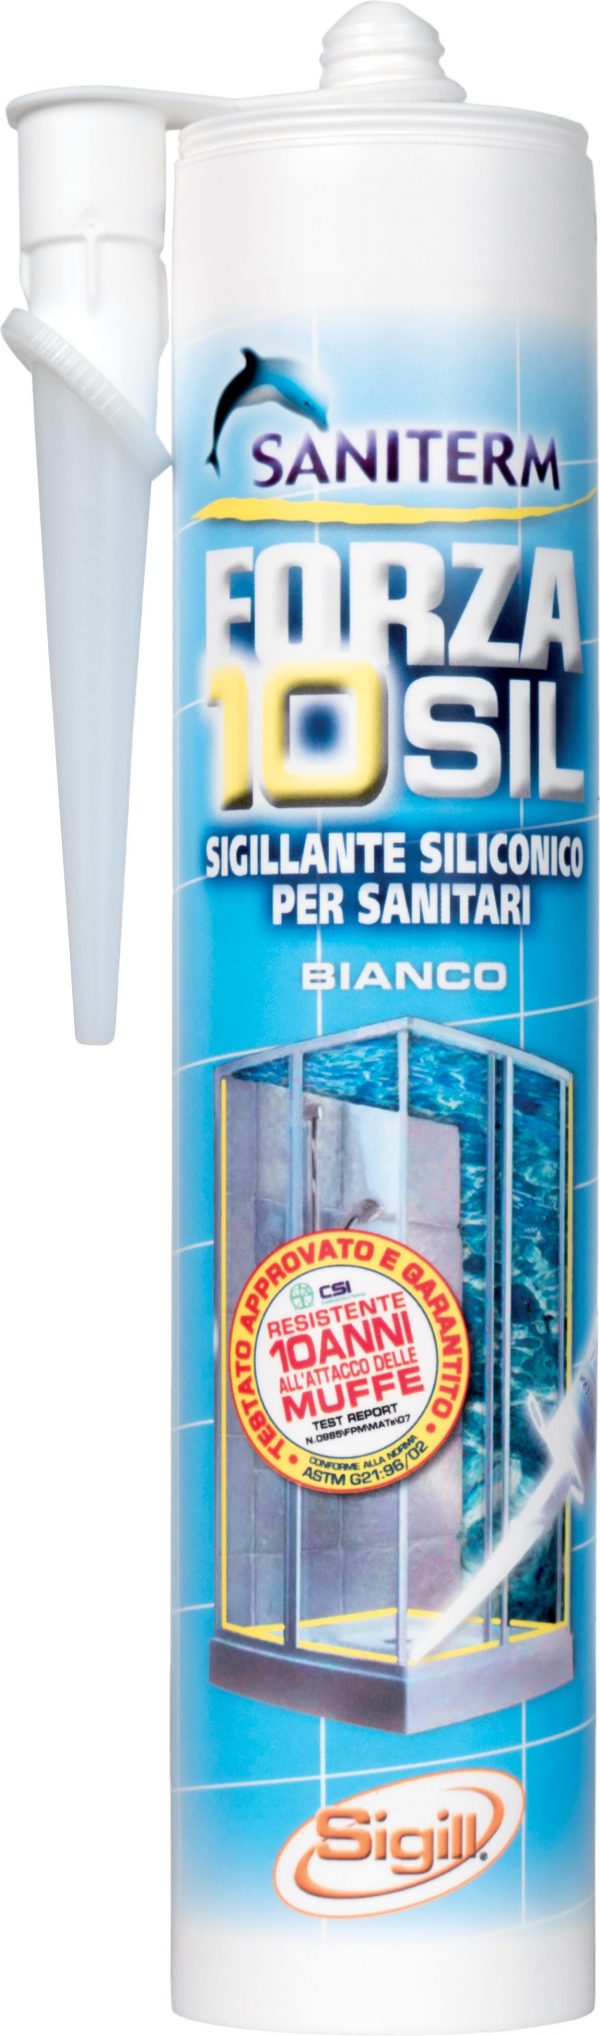 Exceptionally high quality acetic sanitary silcone sealant